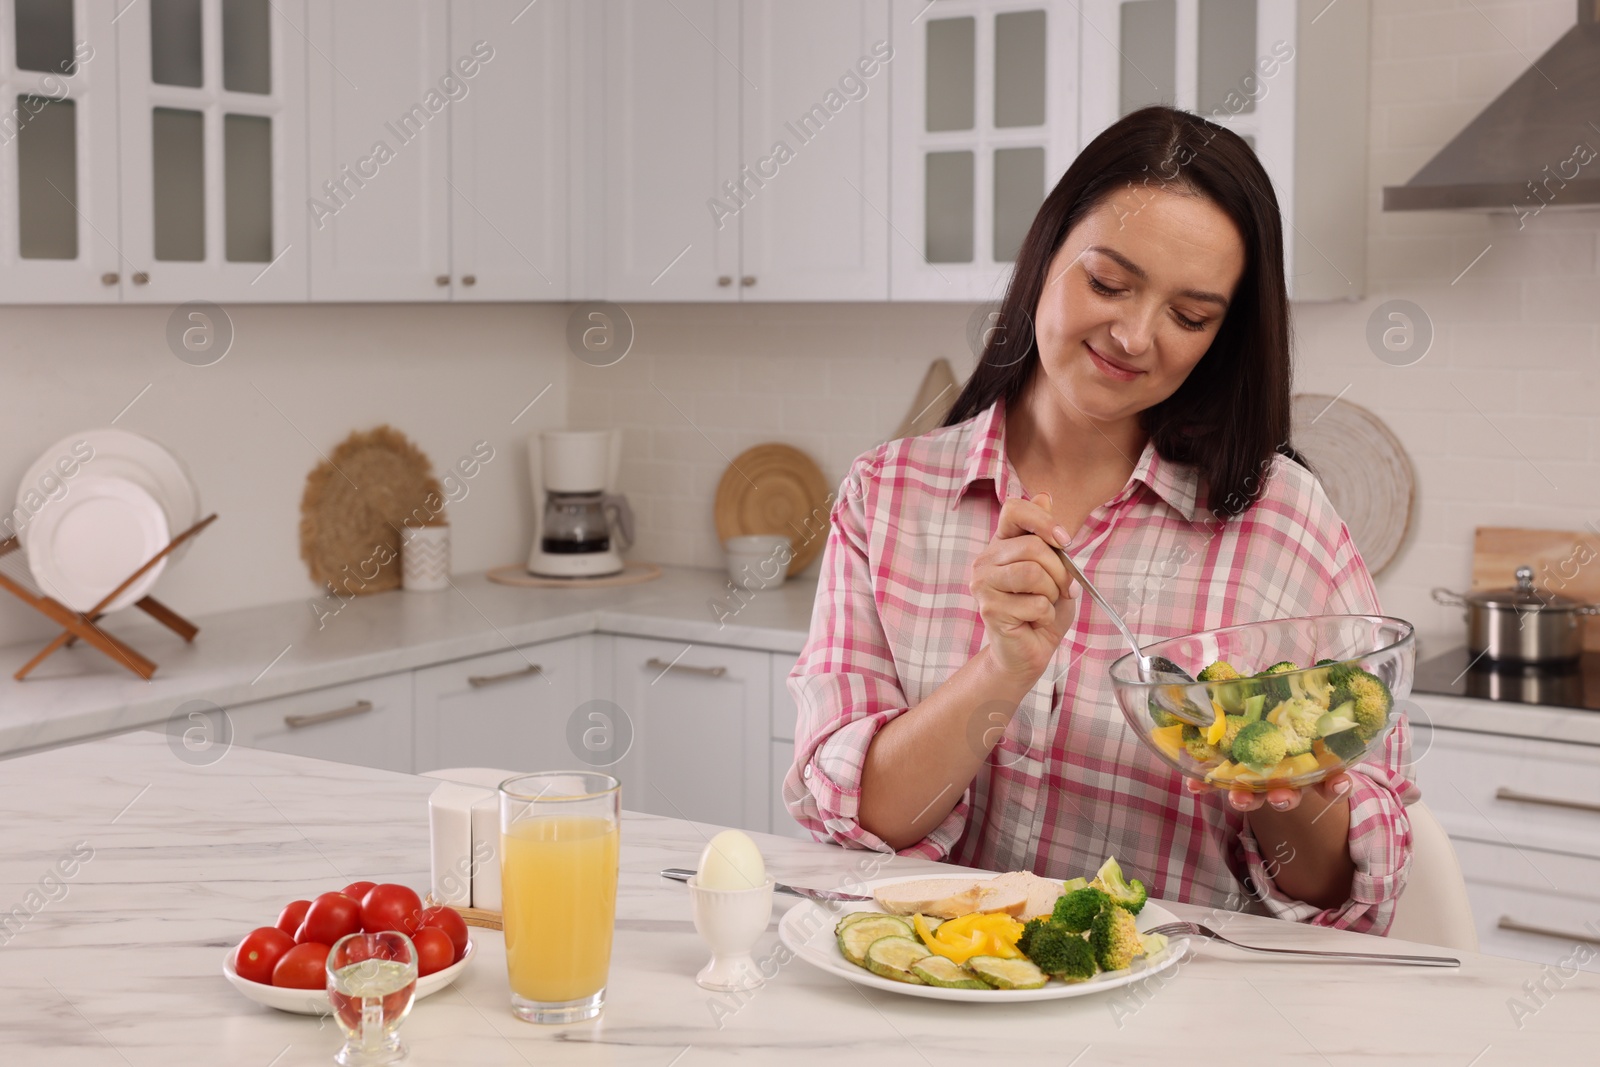 Photo of Beautiful overweight woman having healthy meal at table in kitchen